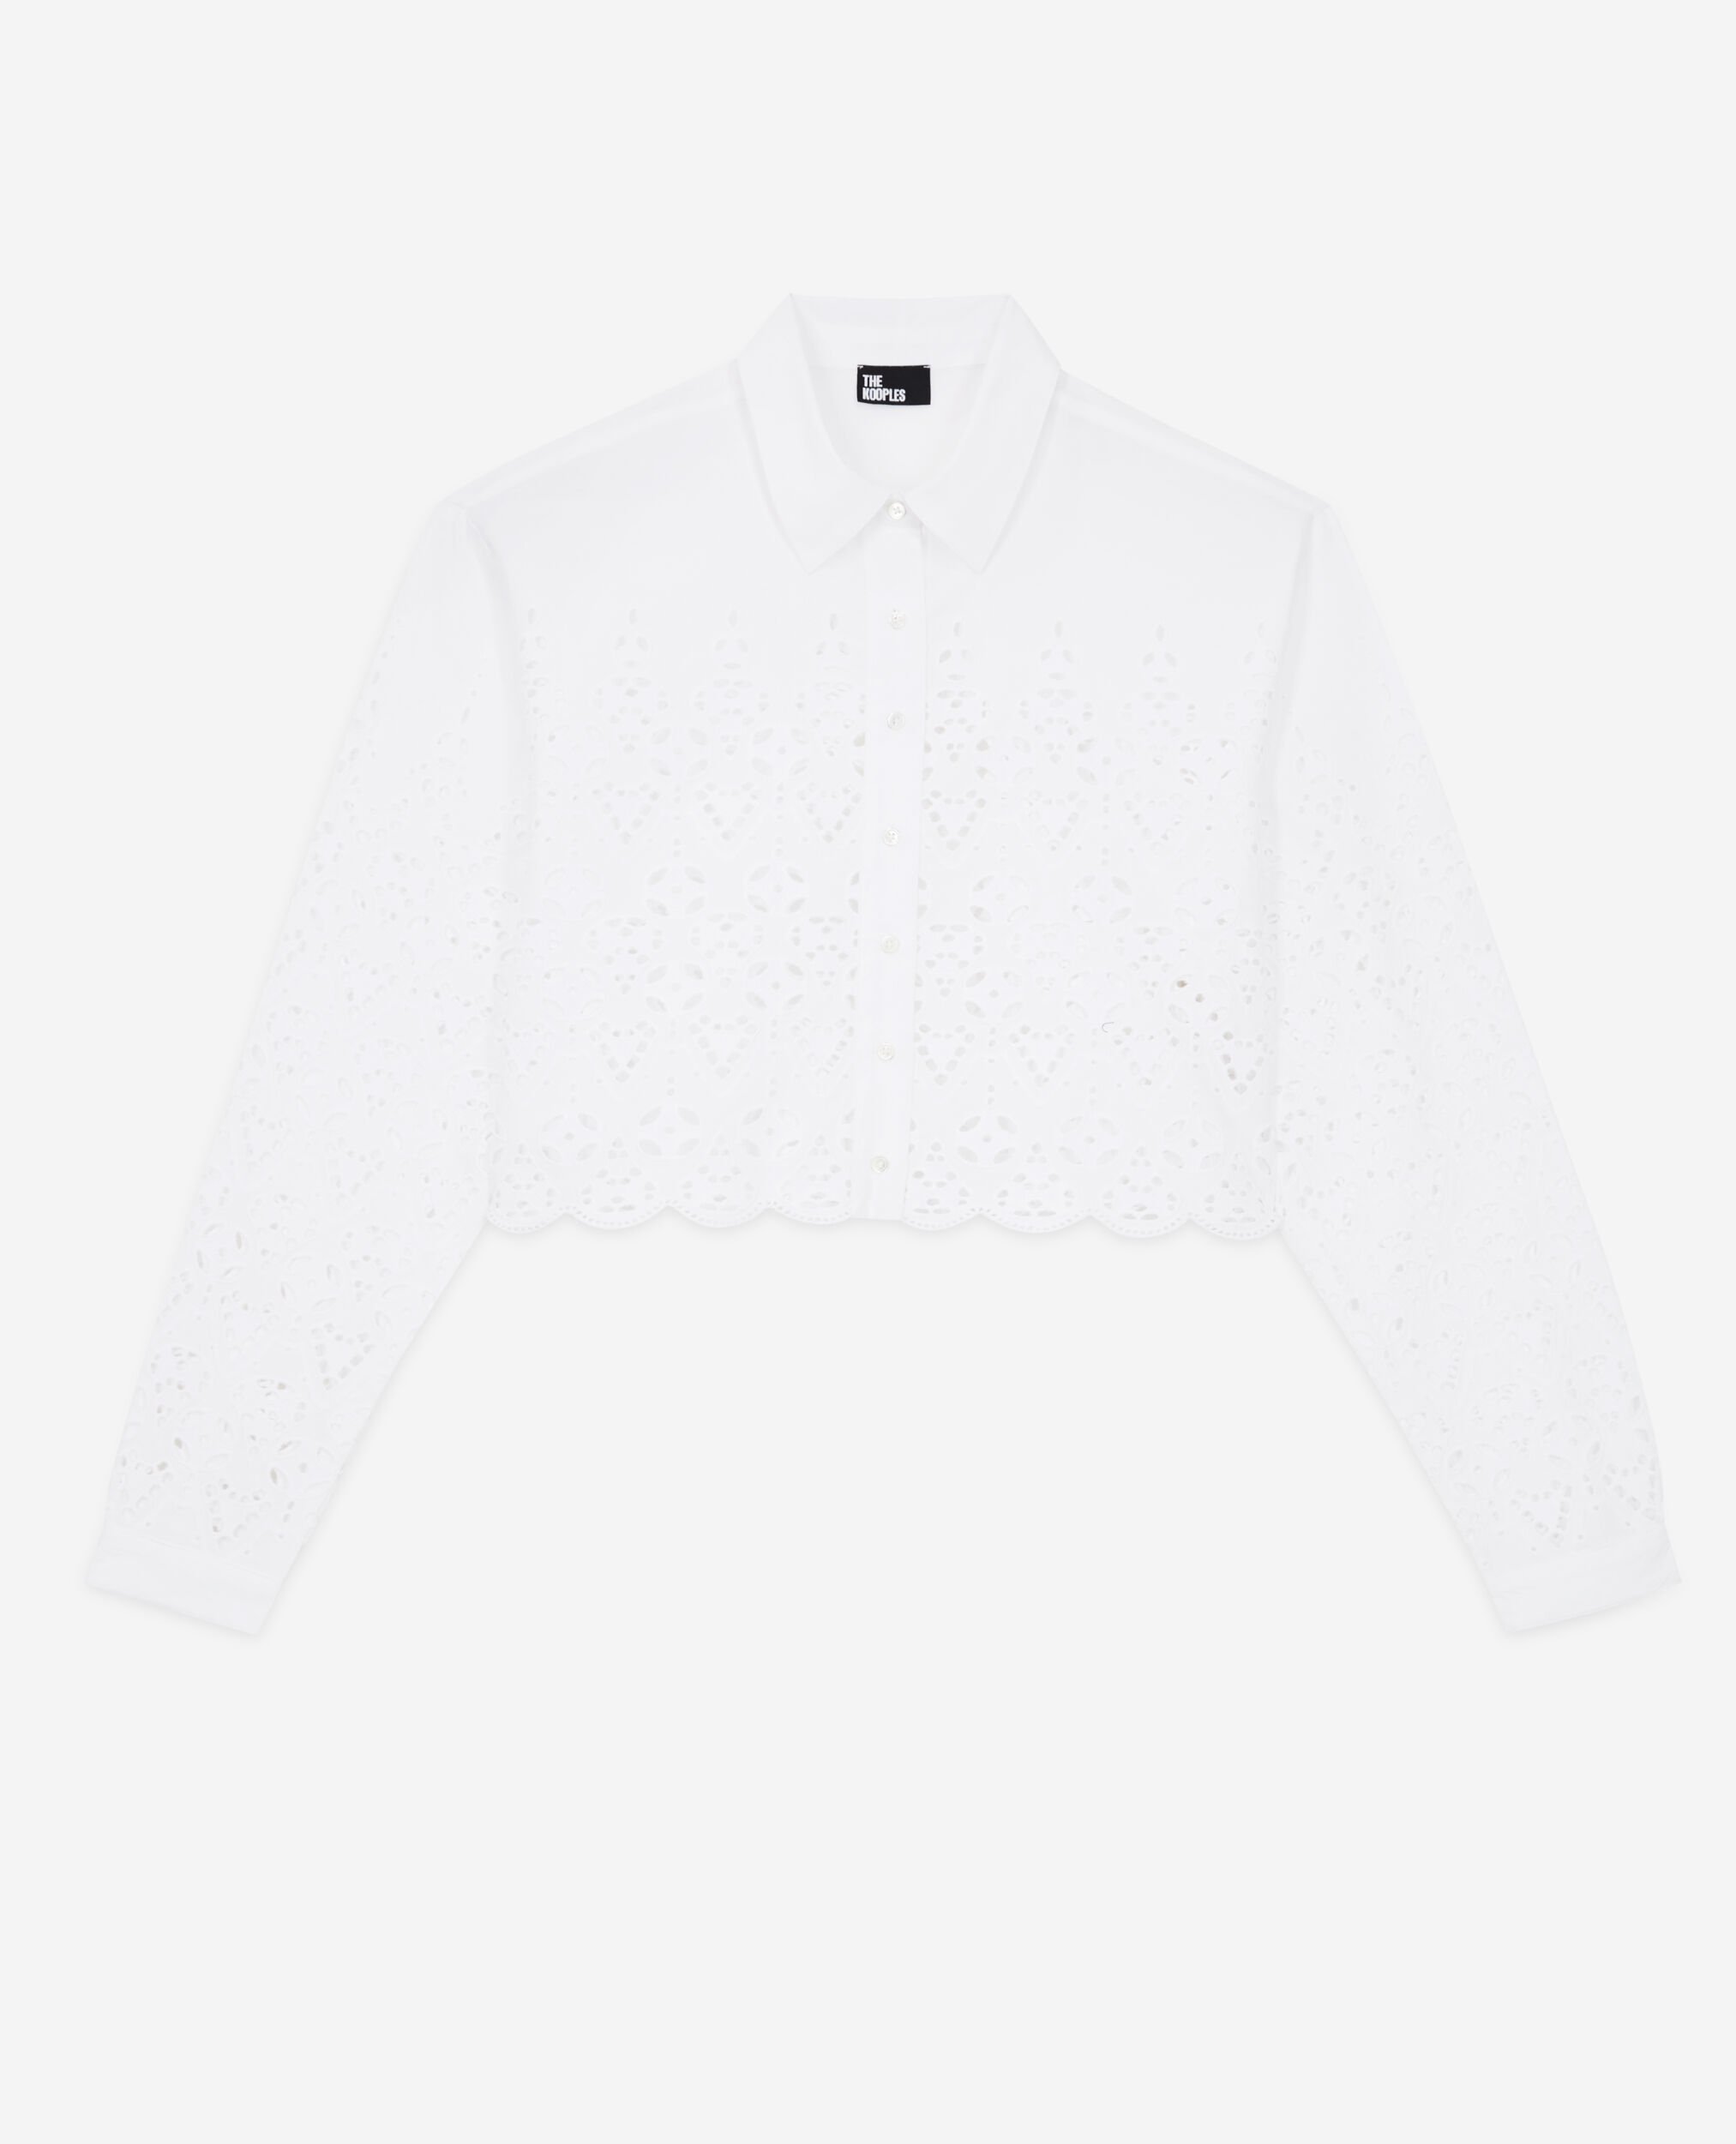 Chemise courte blanche avec broderie Anglaise, WHITE, hi-res image number null